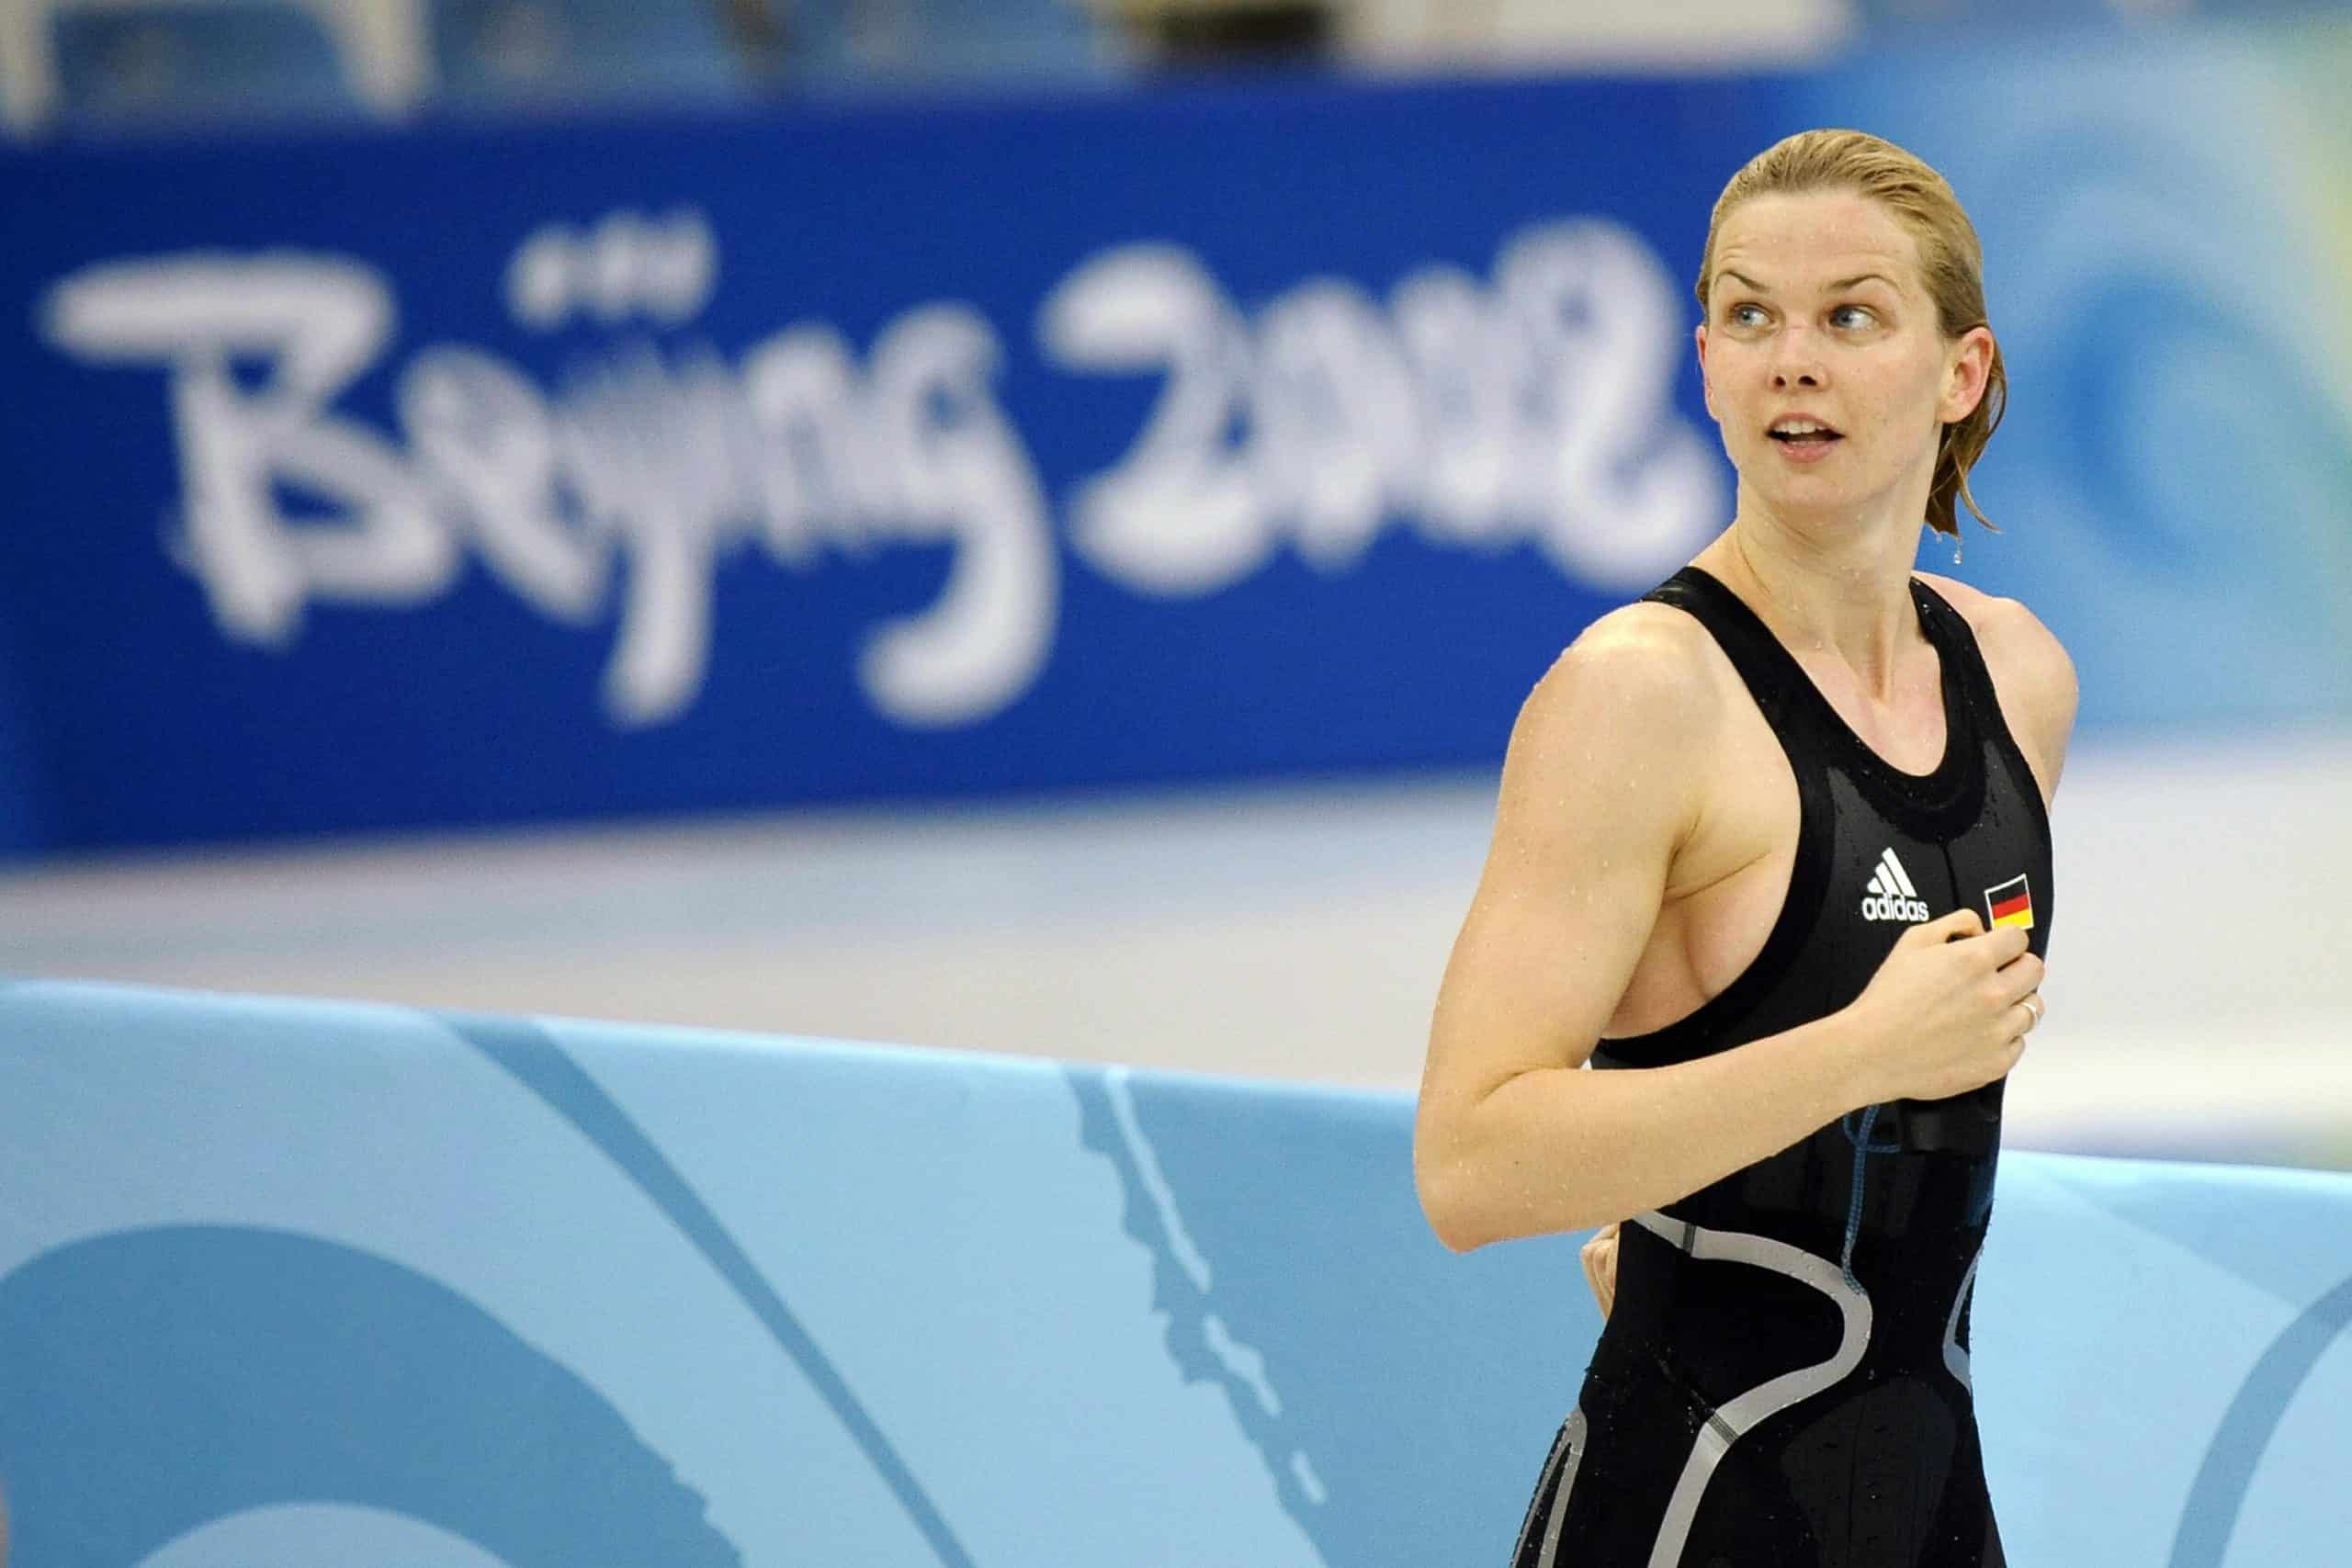 German Sprinter & Olympian, Britta Steffen, To Be Inducted Into